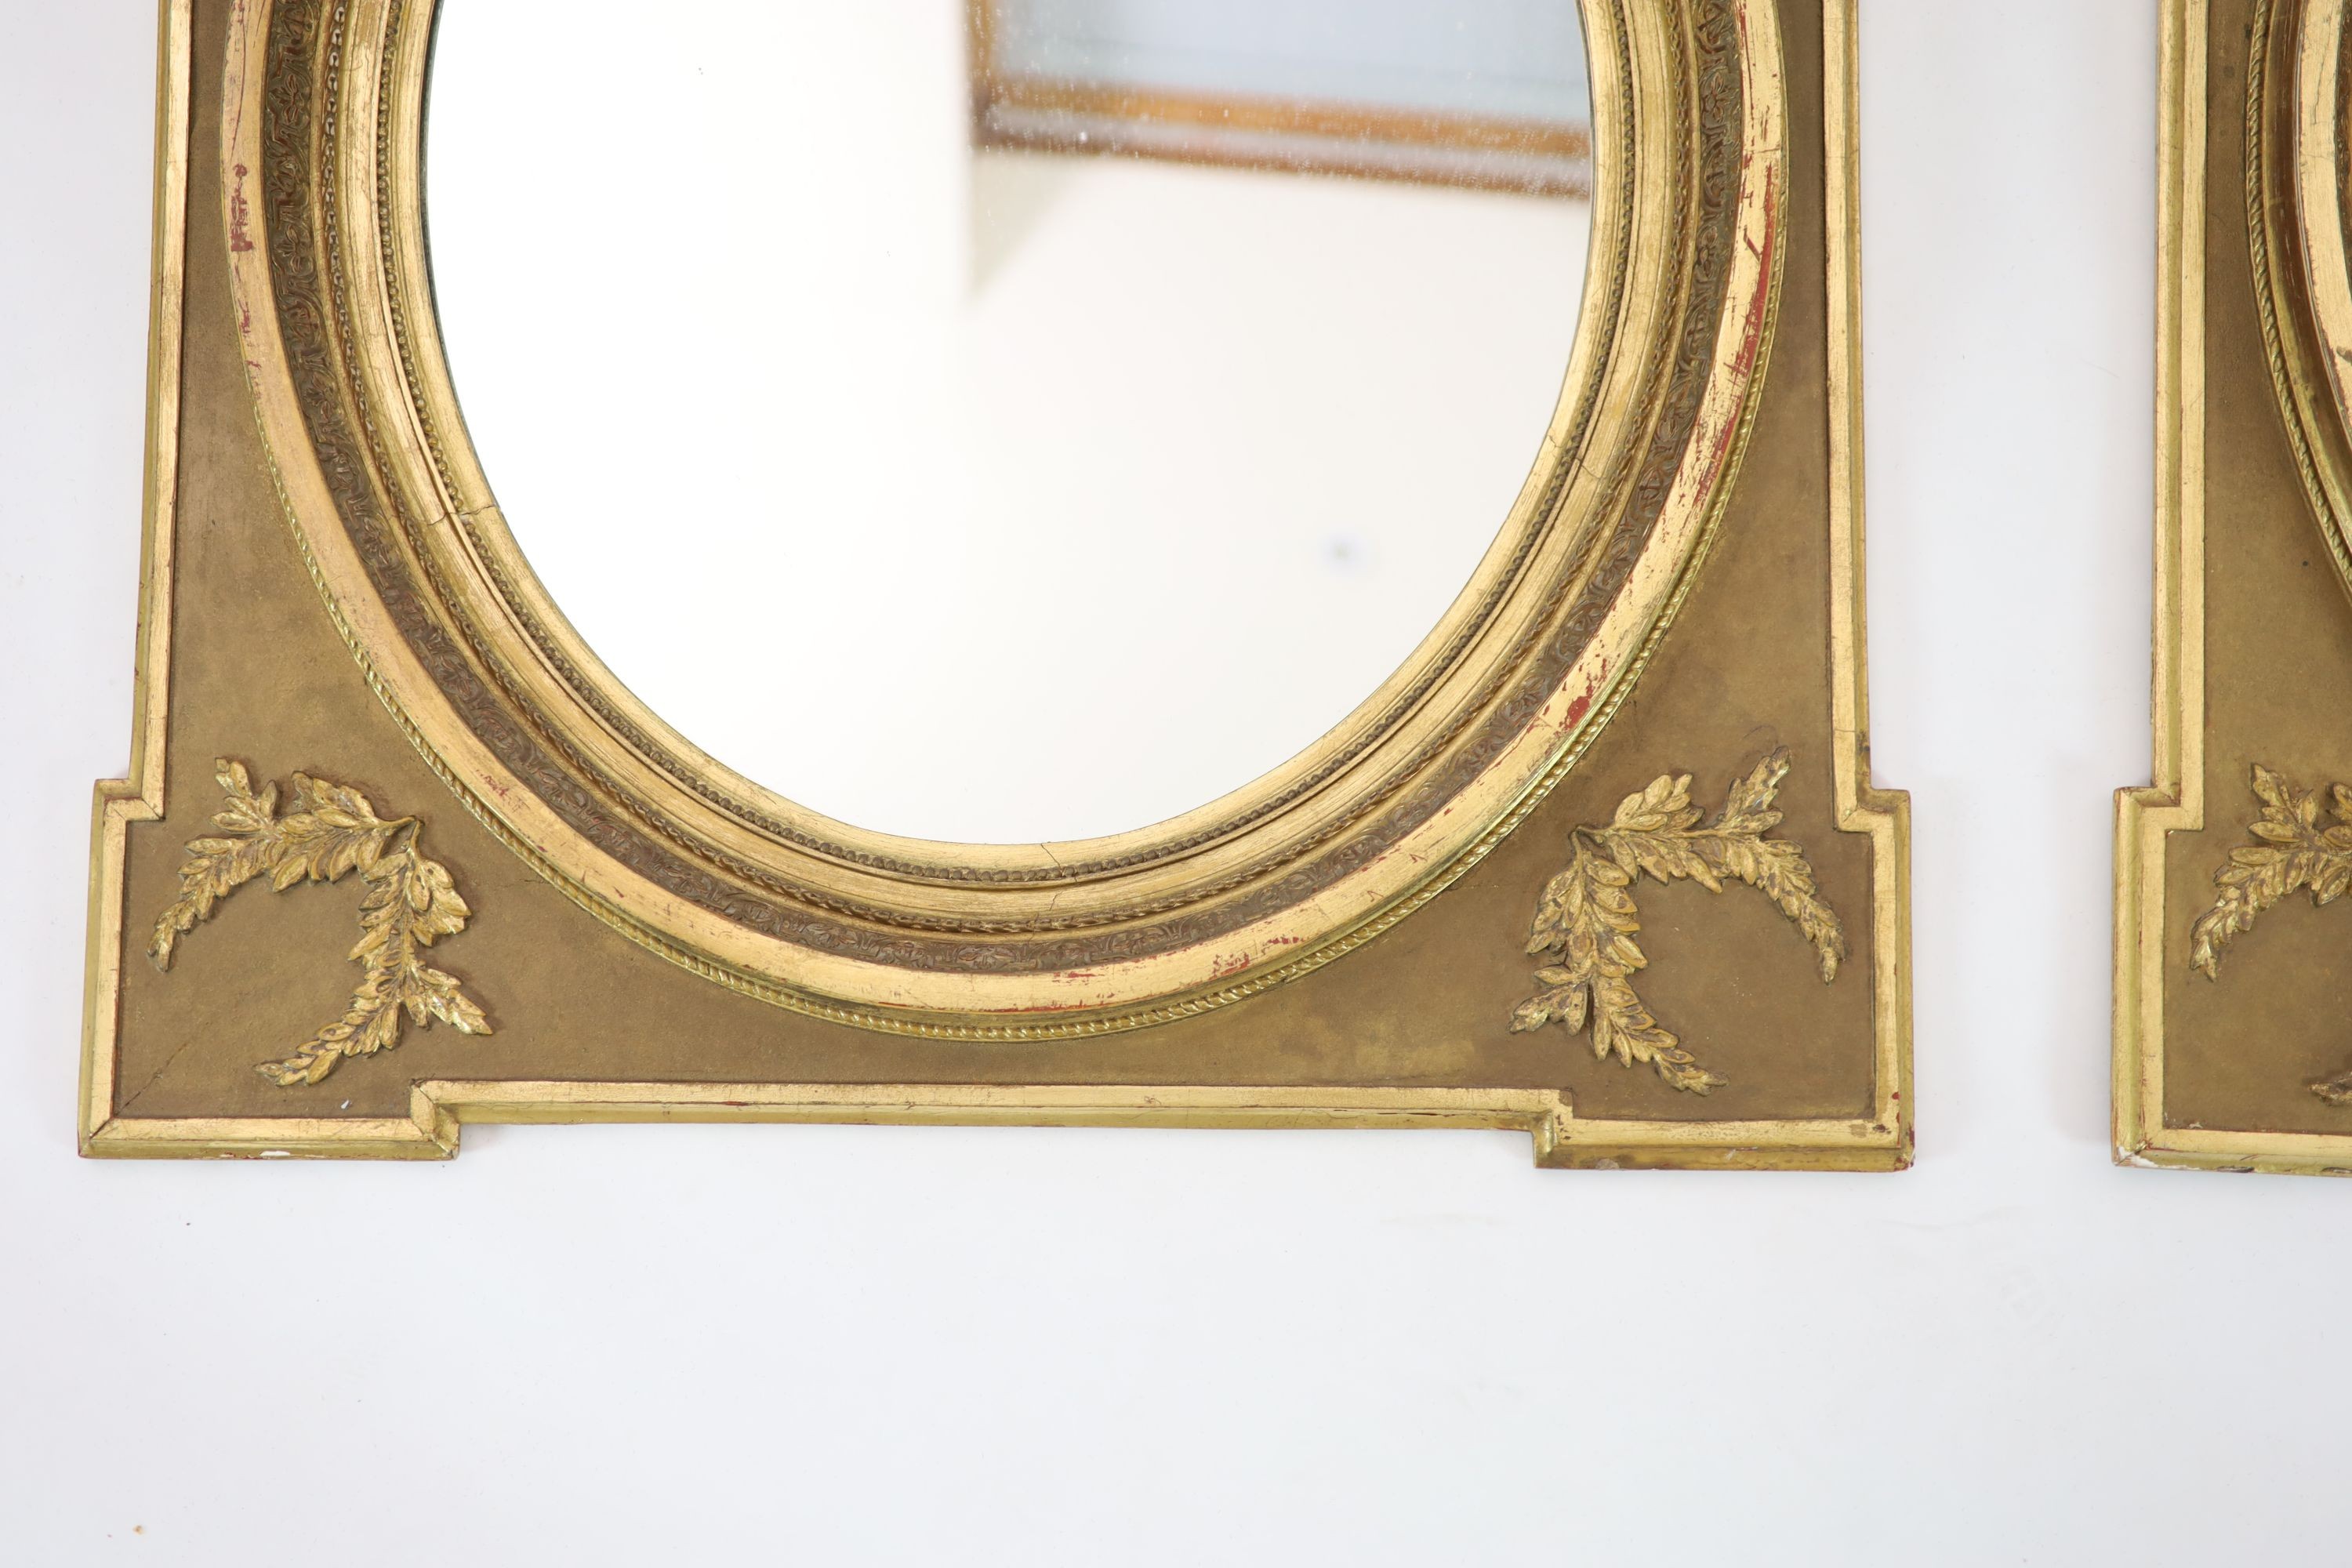 A pair of giltwood wall mirrors, of square form with oval plates, width 85cm, height 98cm